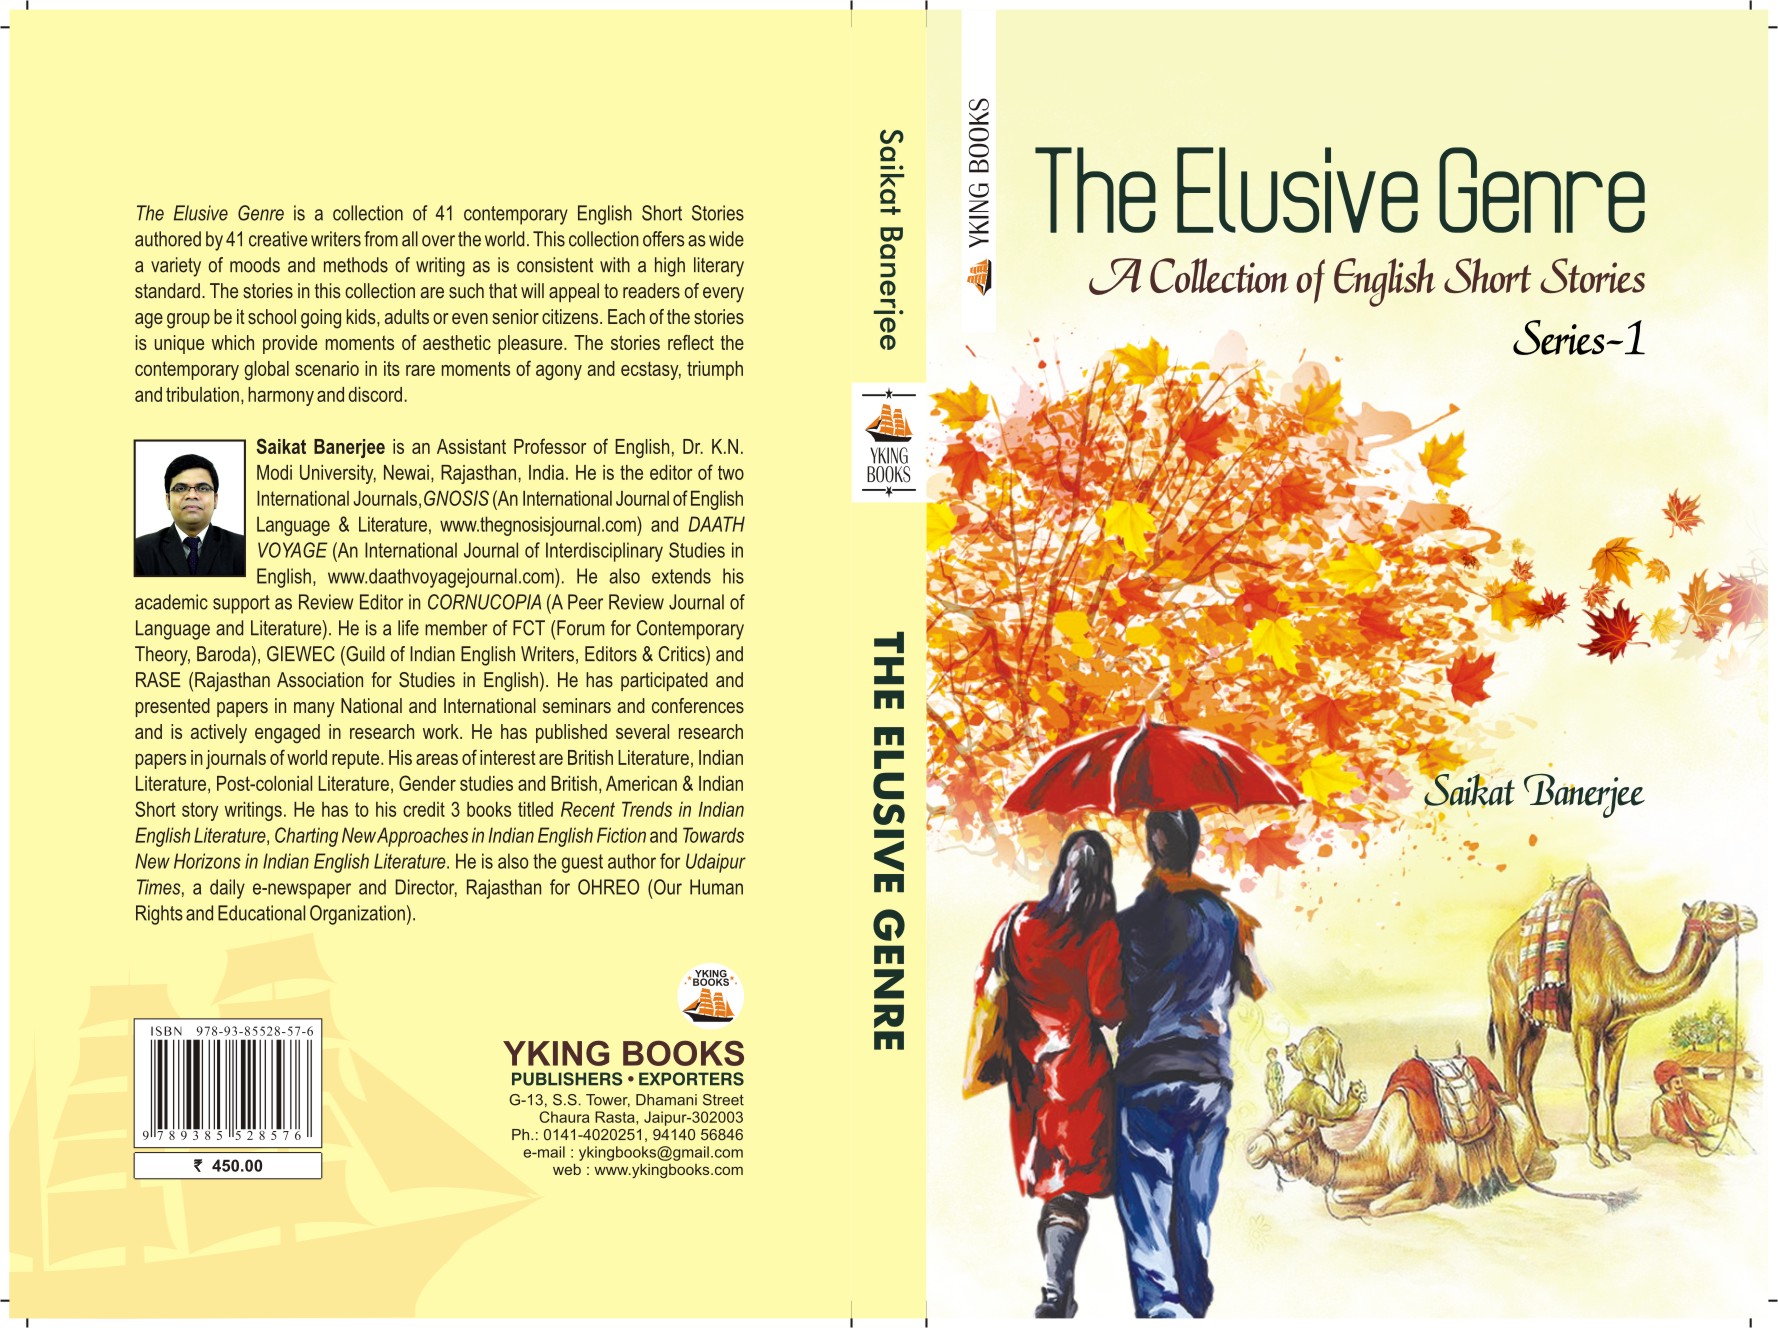 The Elusive Genre A collection of English Short Stories Series 1